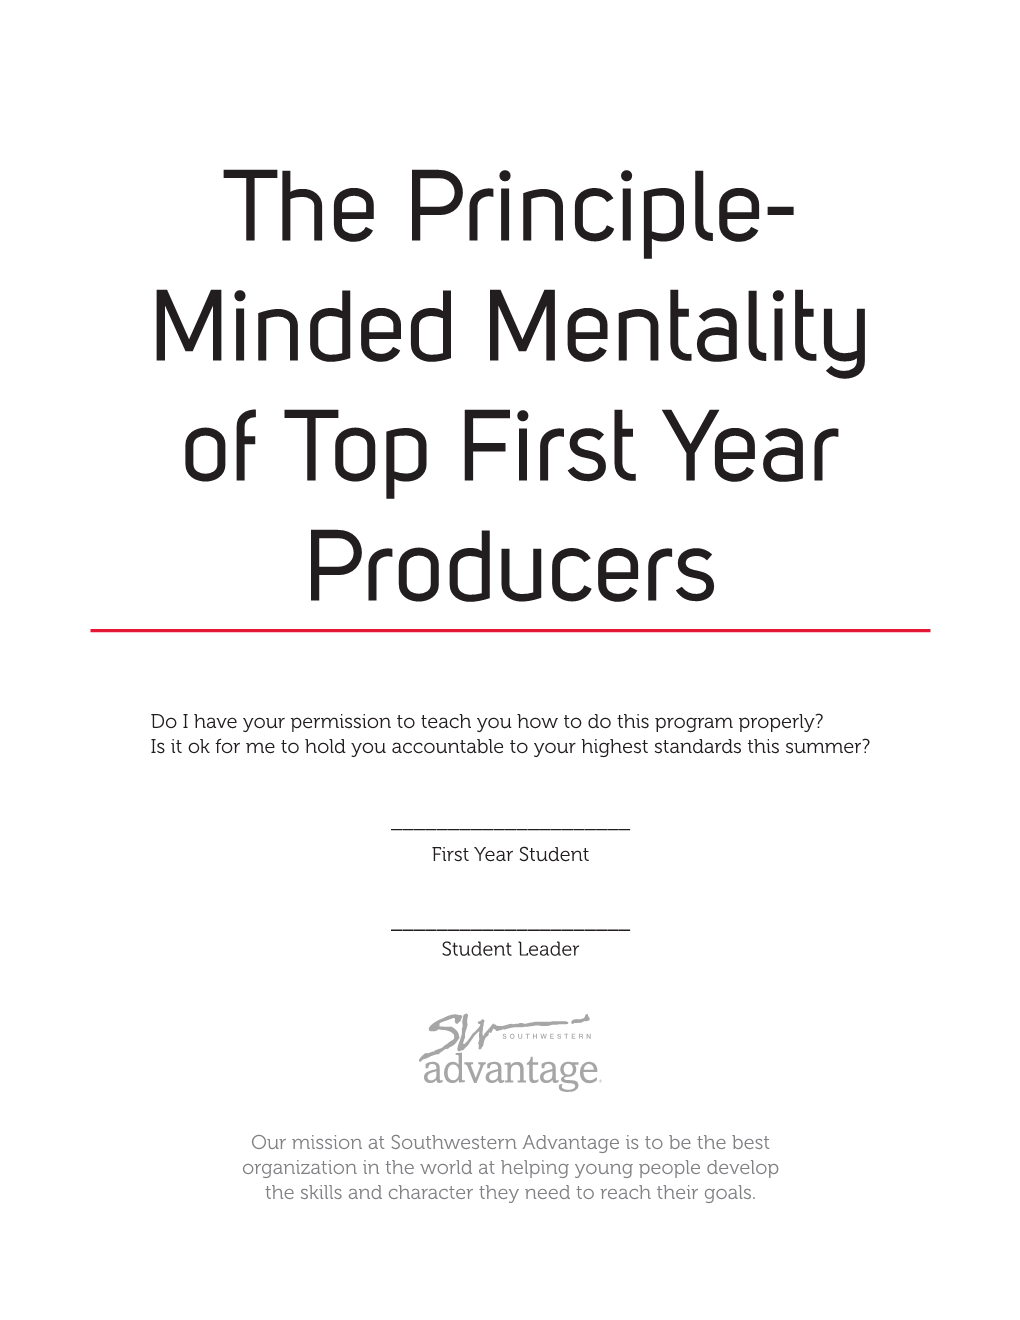 The Principle- Minded Mentality of Top First Year Producers